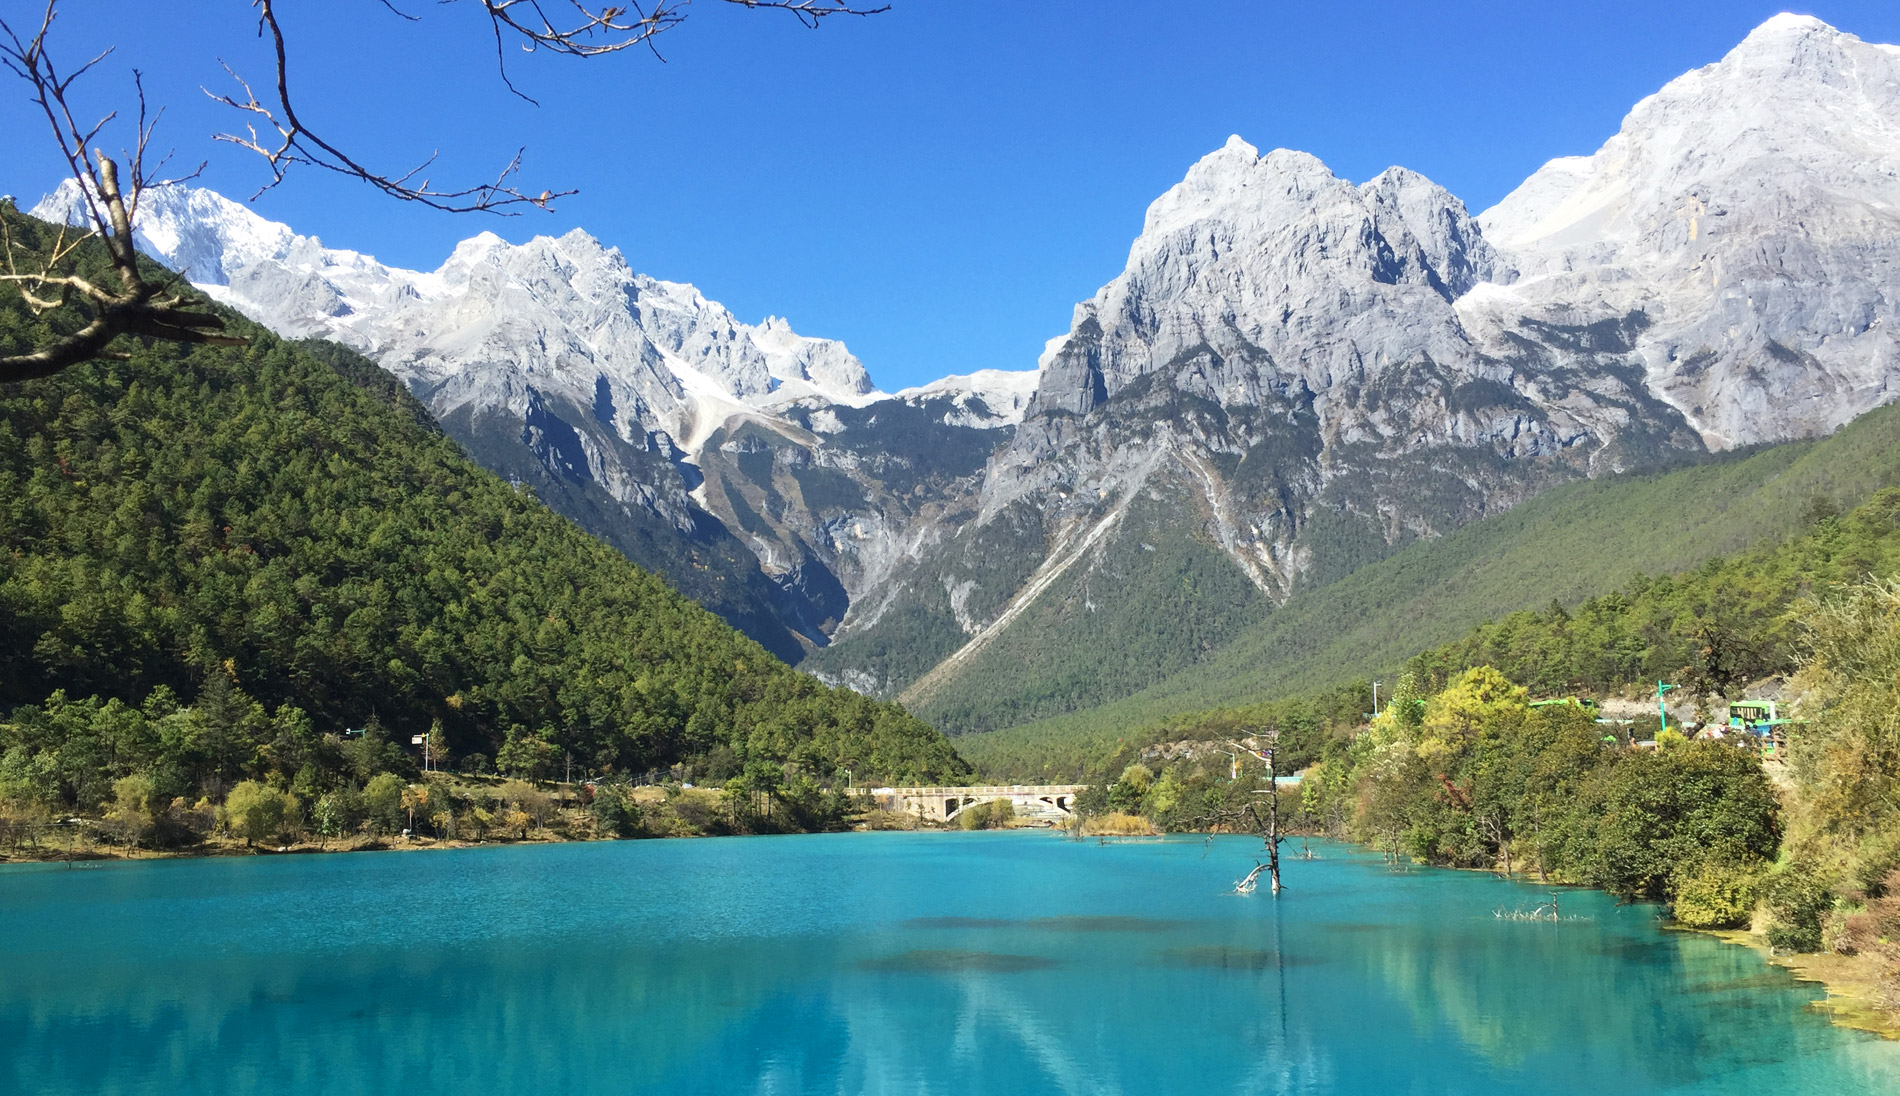 Yunnan: 9 things to do in China's wild, diverse province